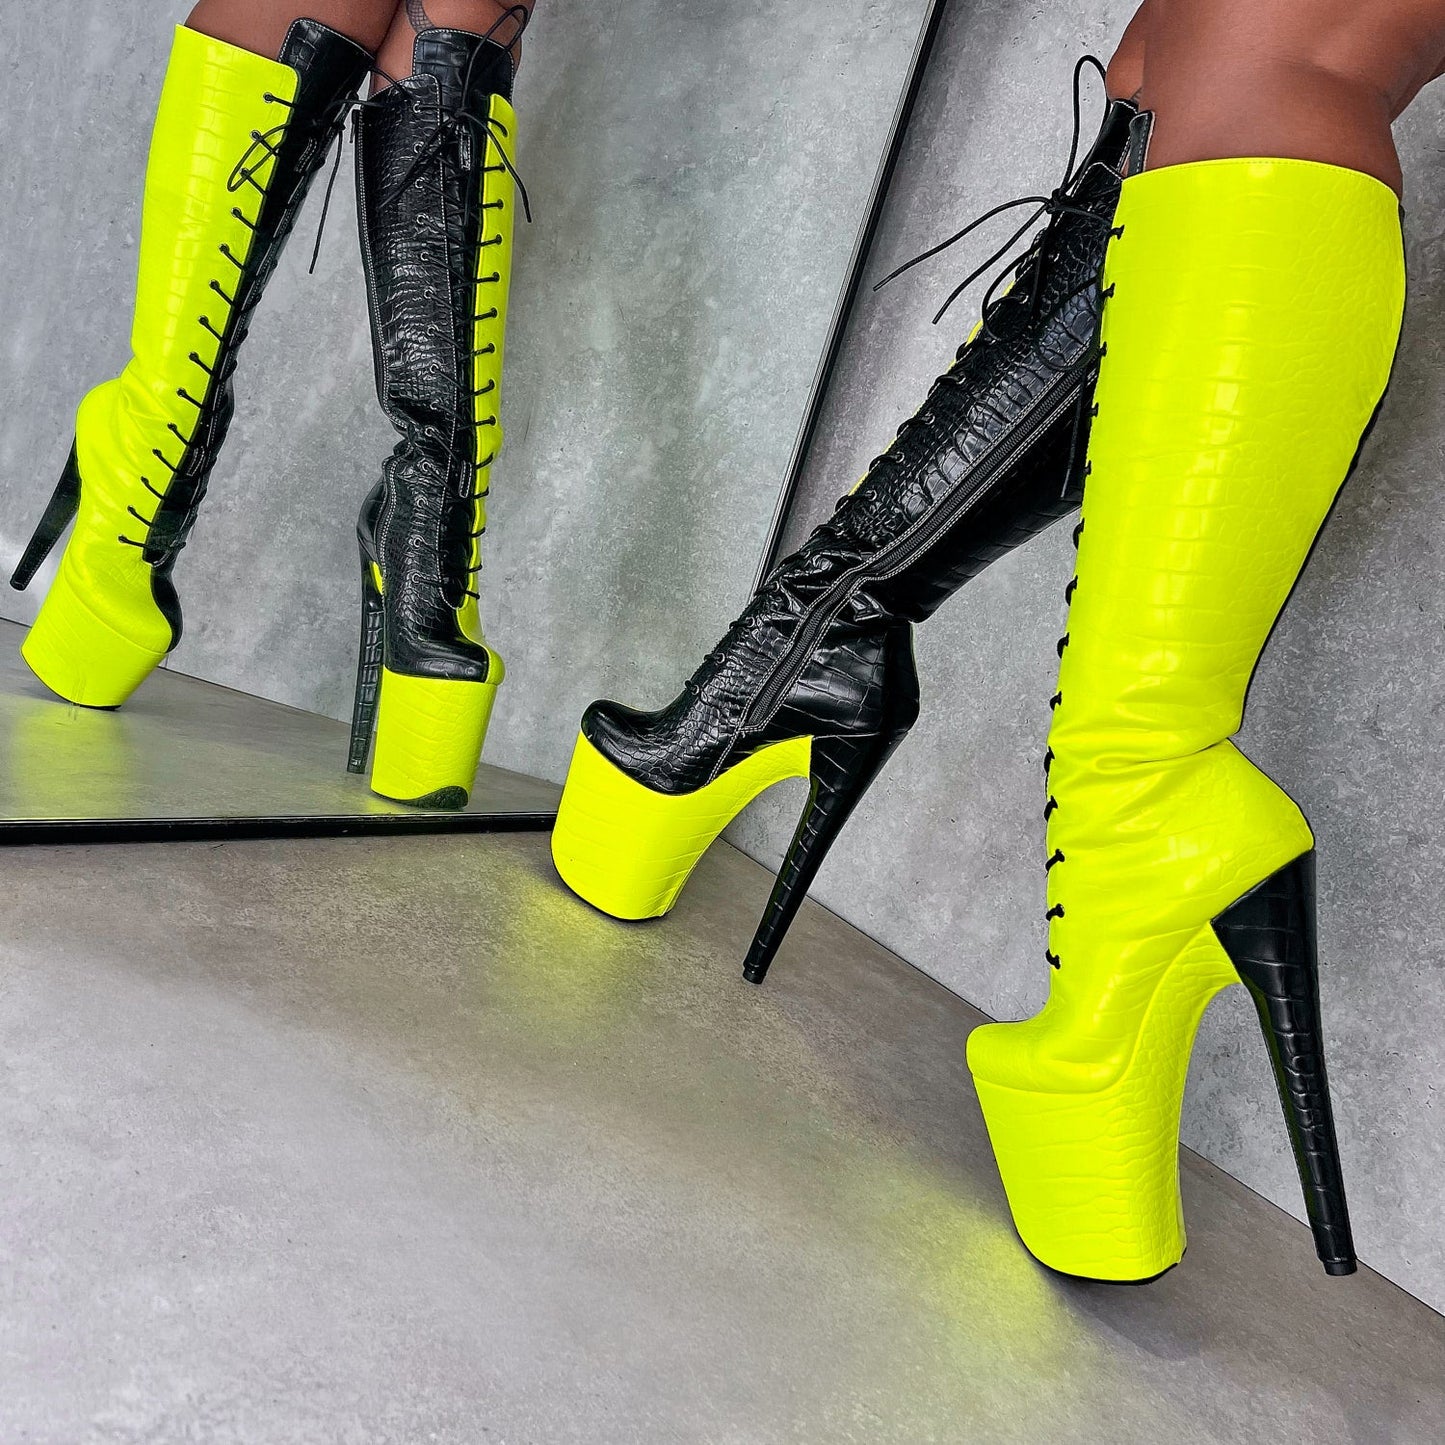 SNAPPED Black/Neon Knee Boot - 8INCH